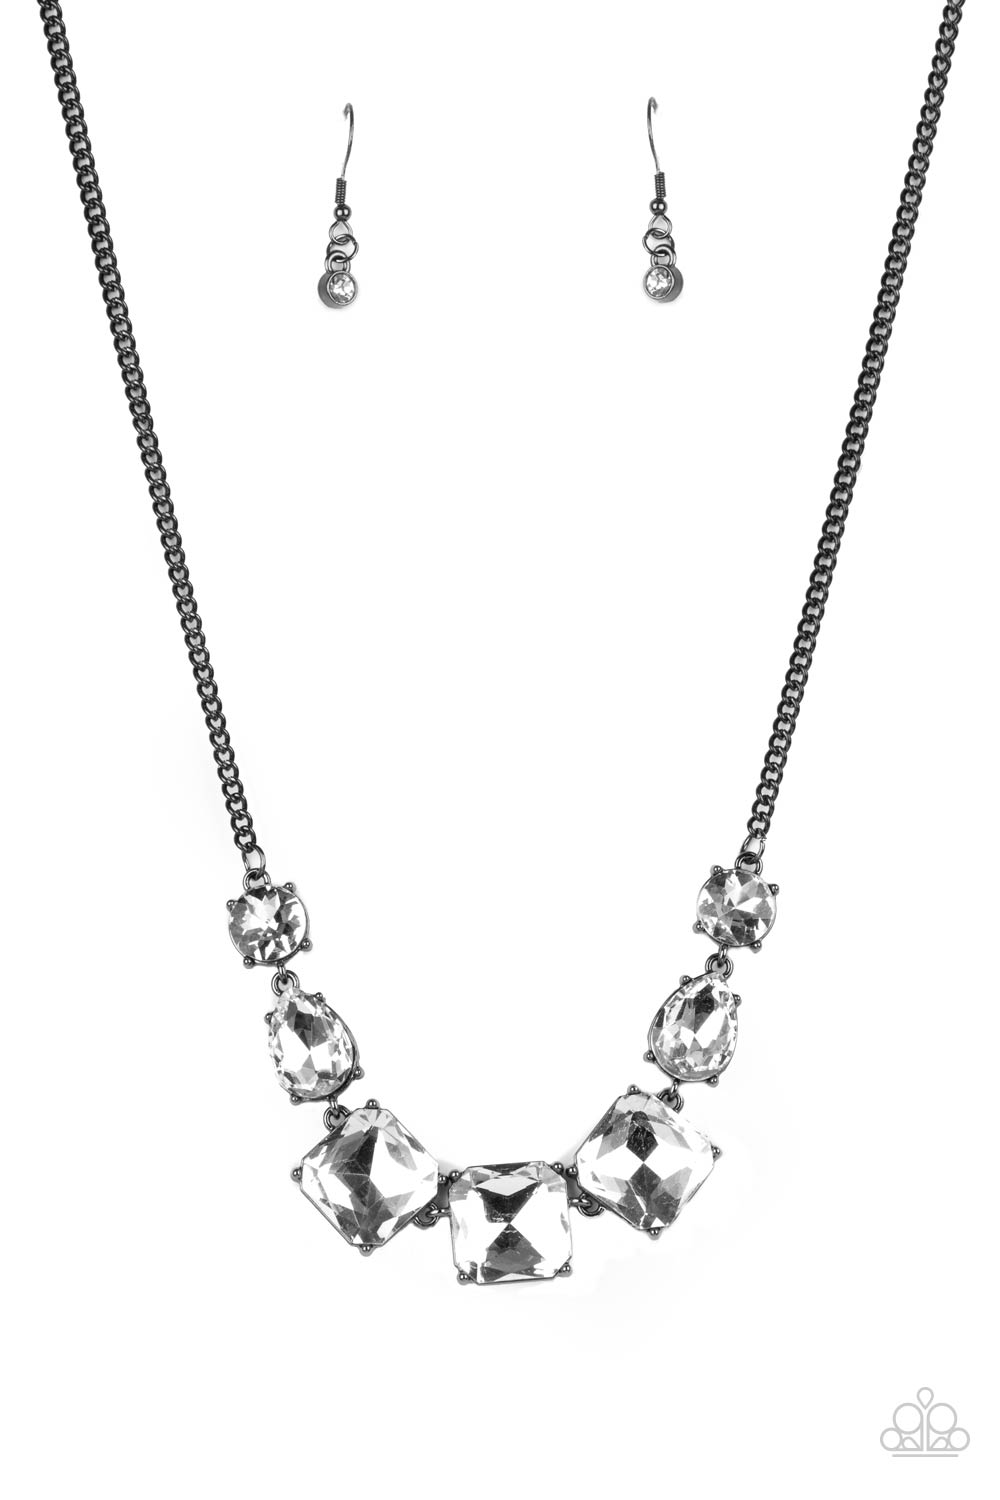 Unfiltered Confidence Necklace (White,Black)